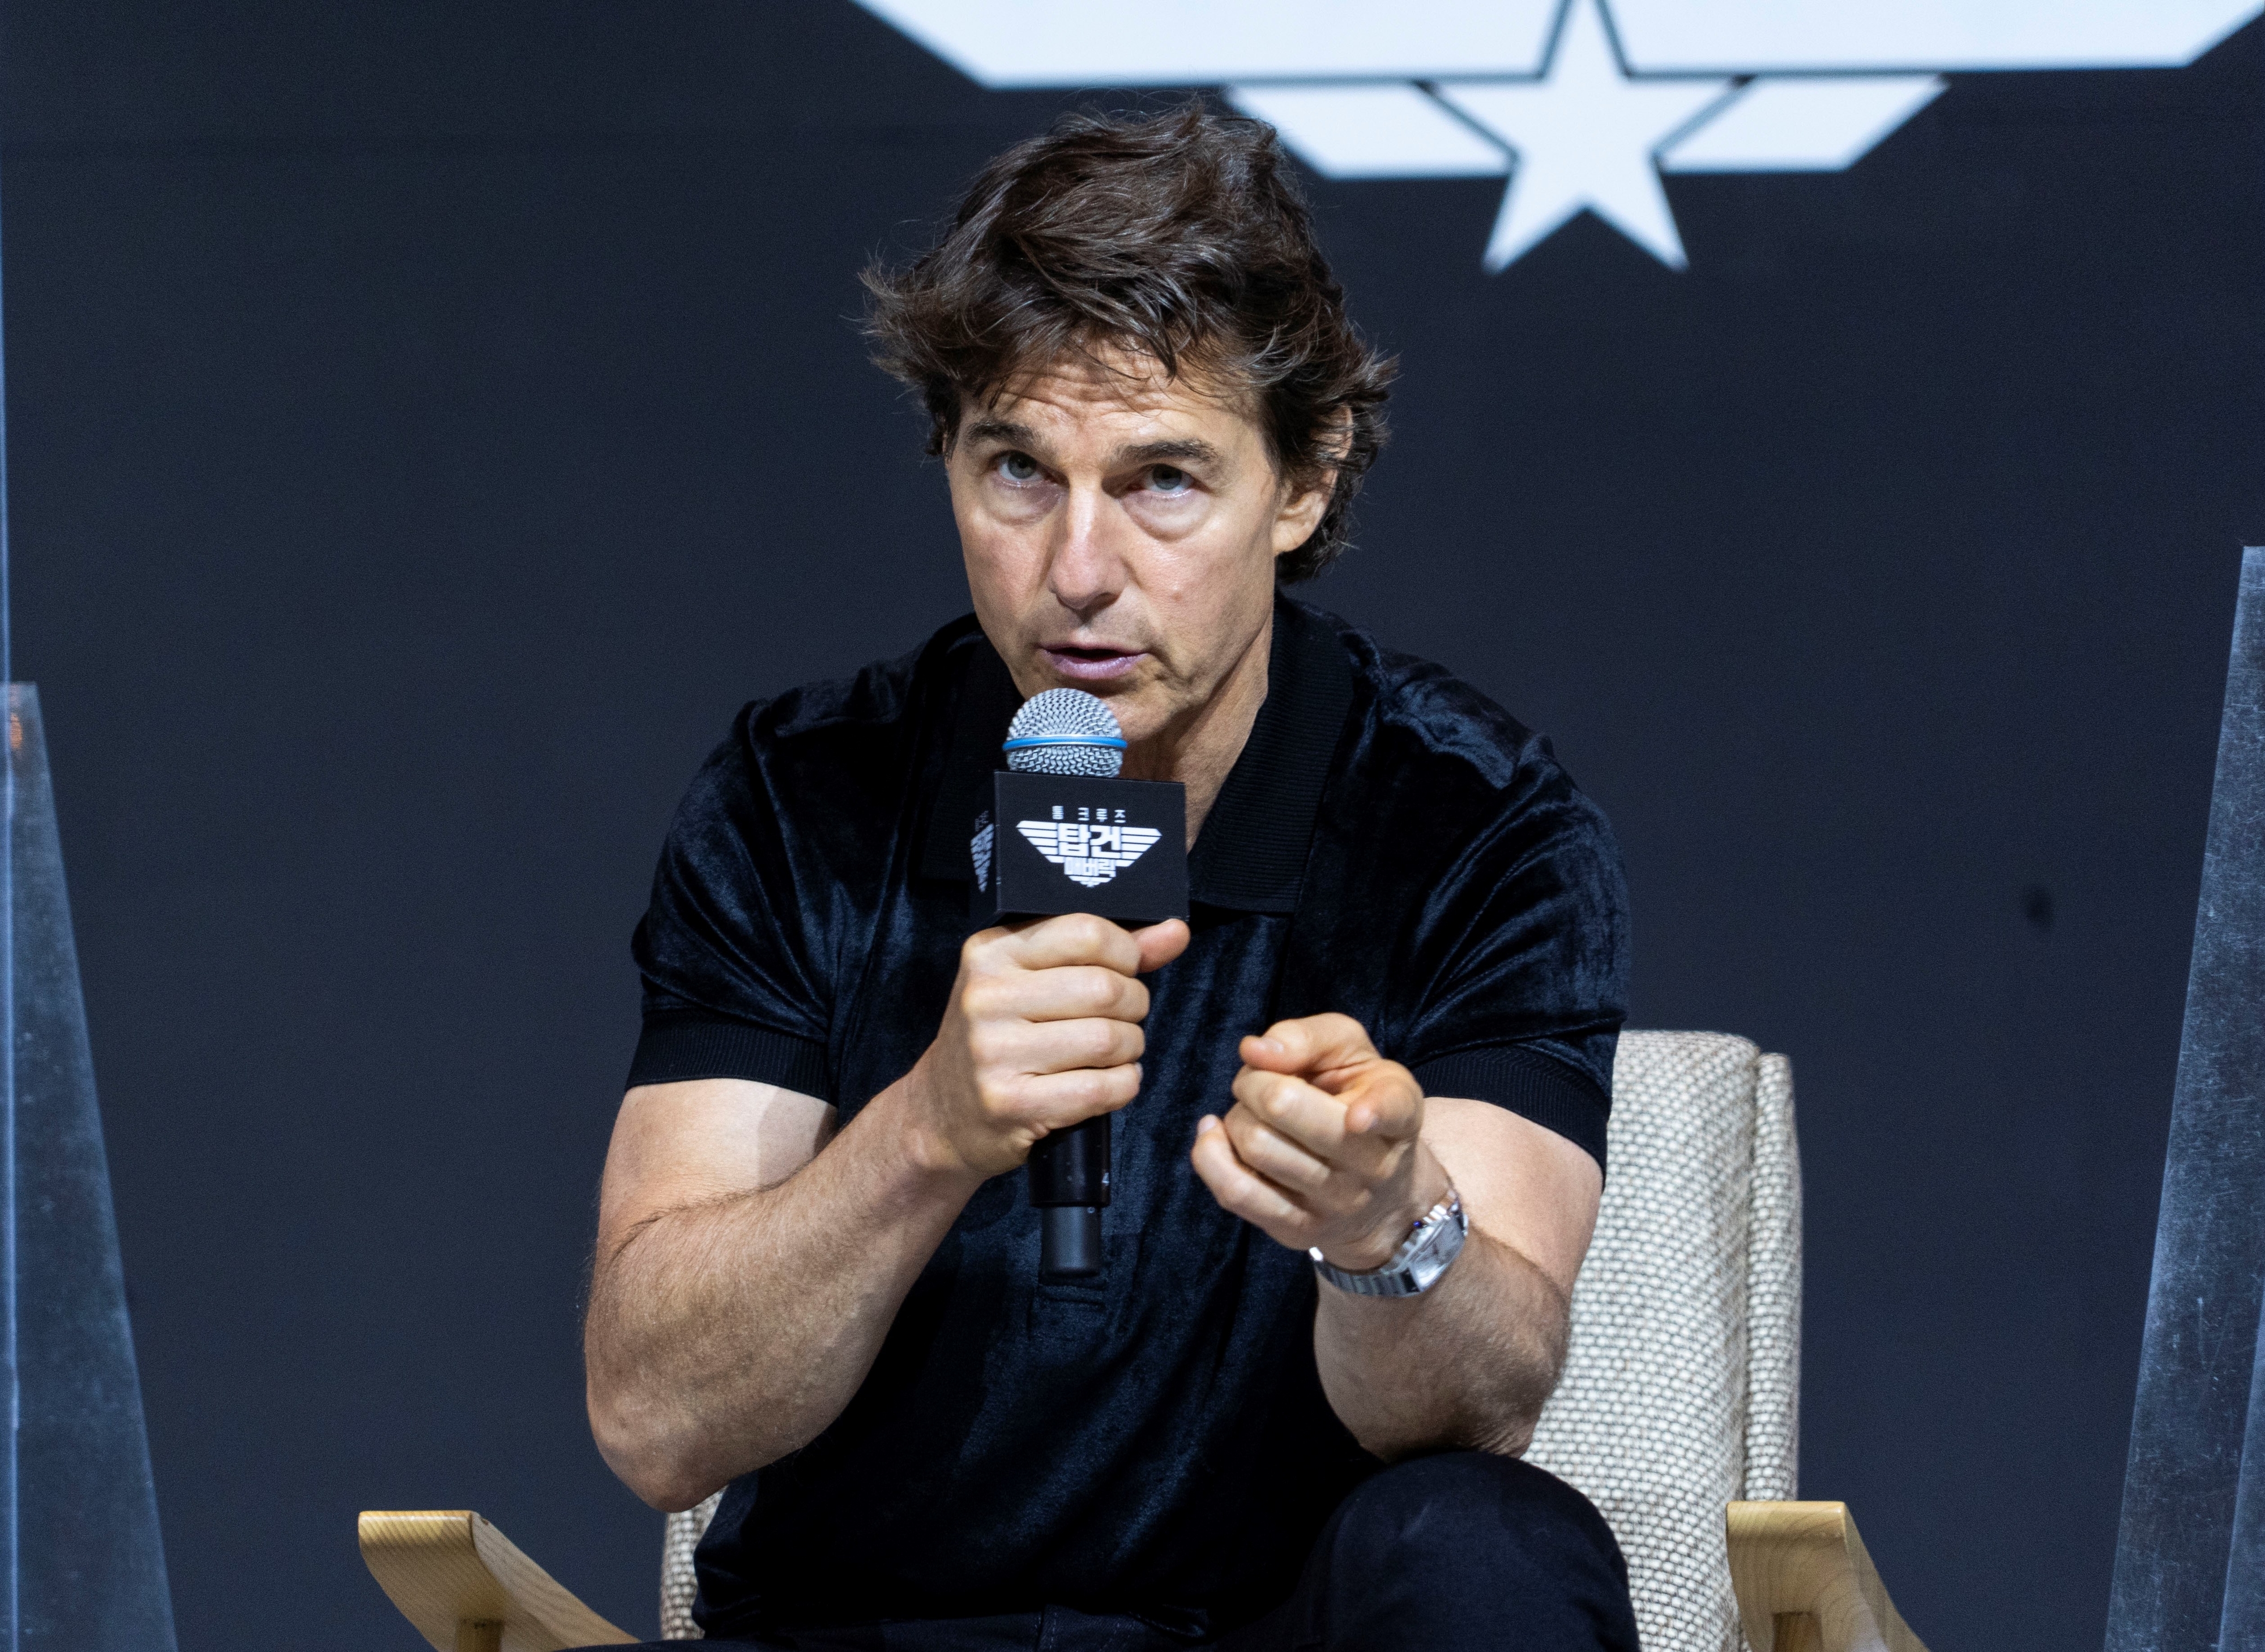 Tom Cruise speaks into a microphone while sitting in a chair, gesturing with his hand, during a public event